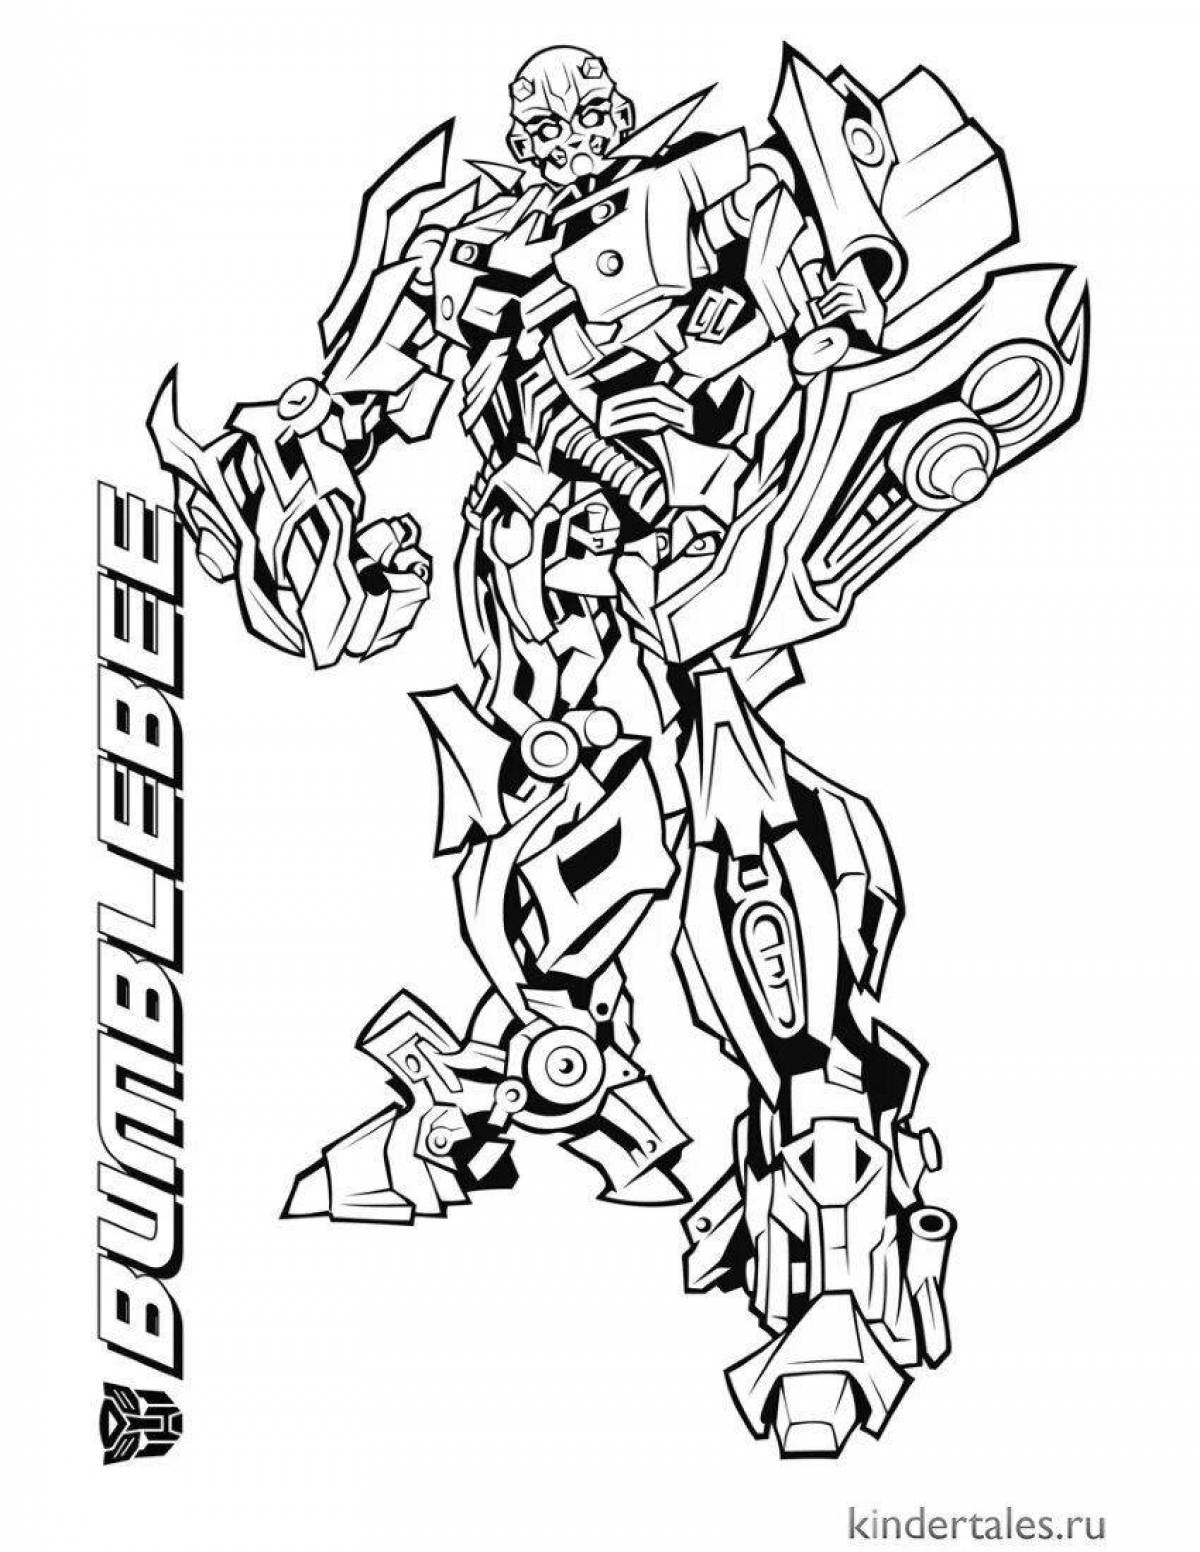 Intriguing barricade coloring page